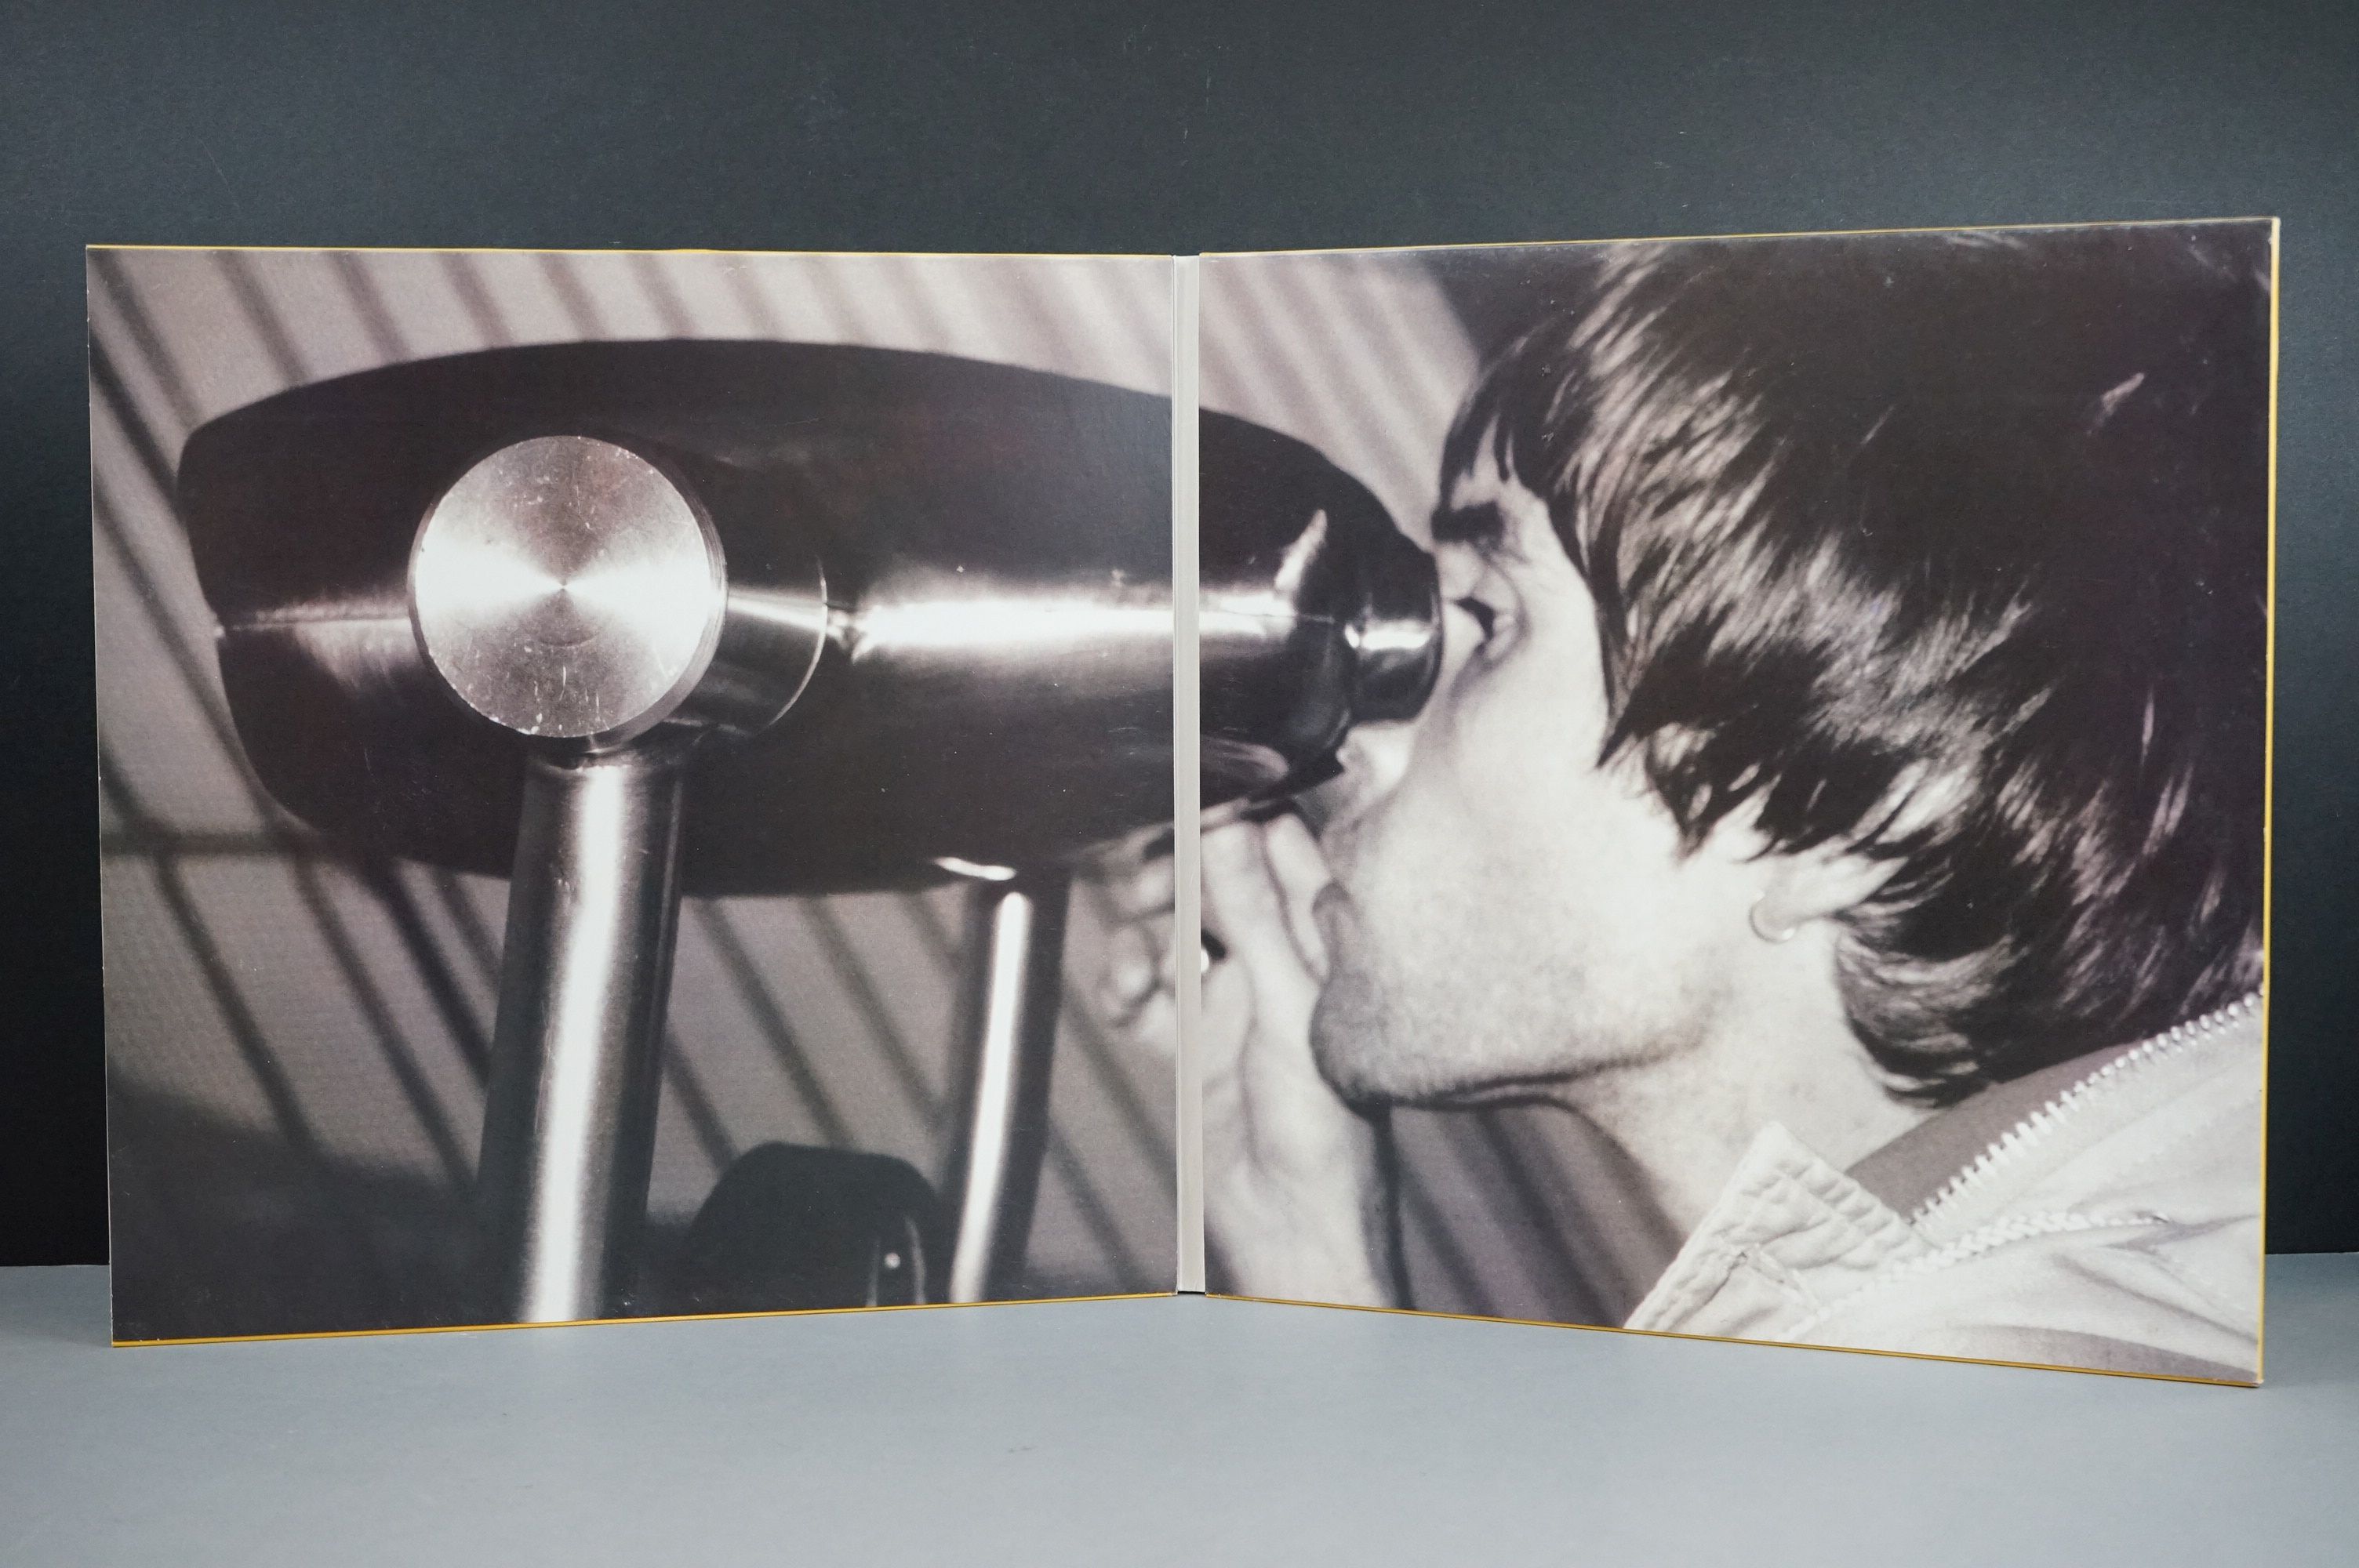 Vinyl - Two Ian Brown LPs on Polydor to include Unfinished Monkey Business 539916-1 ltd edn gatefold - Image 2 of 12